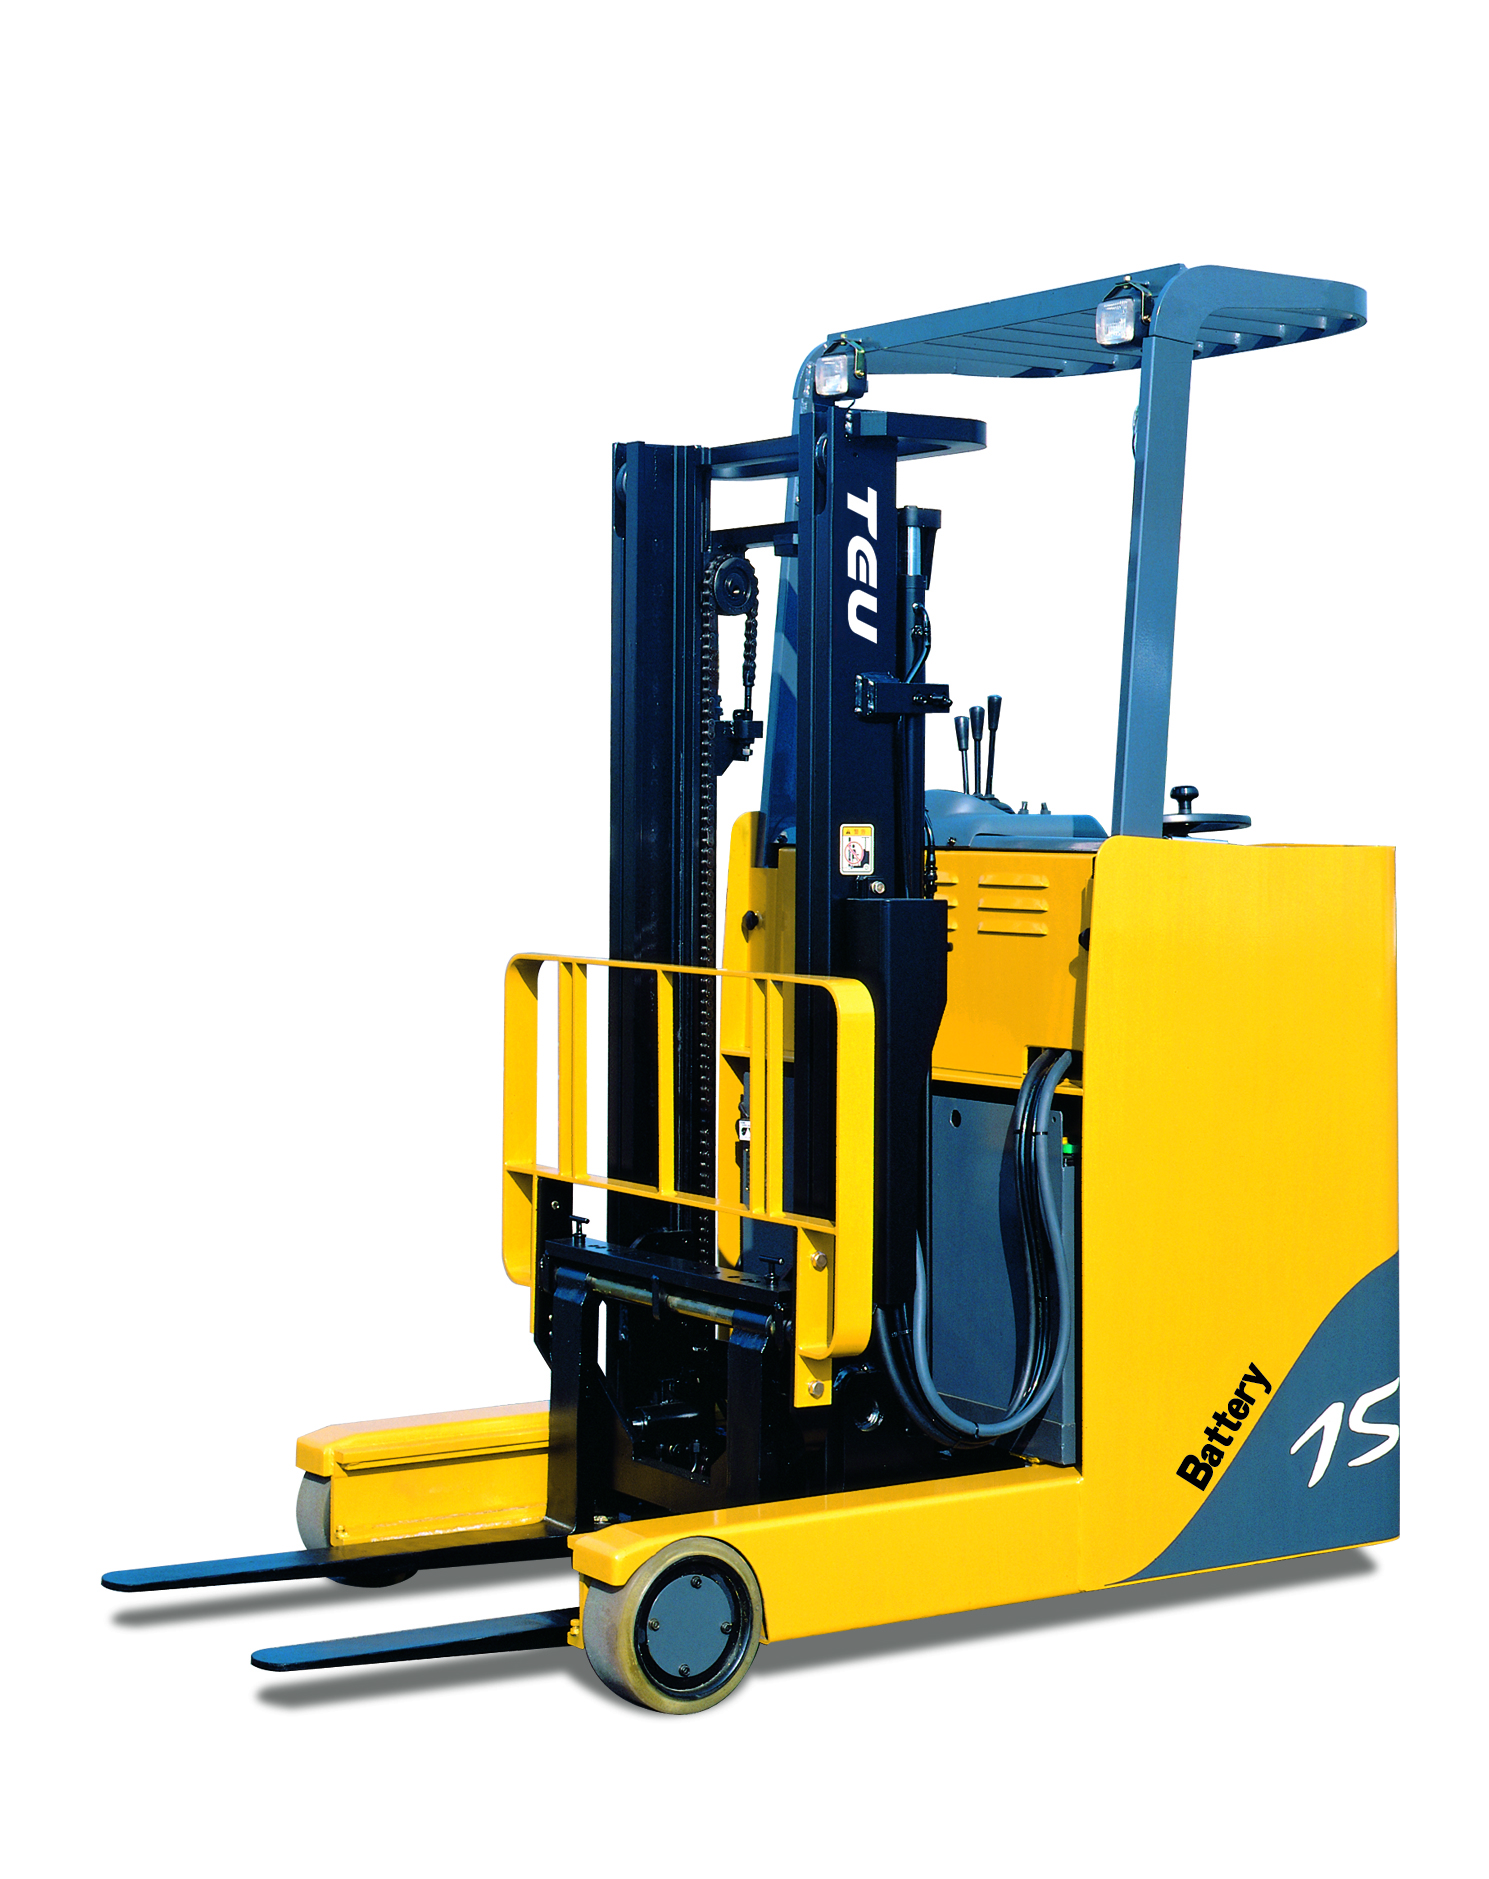 Lead Acid Battery Forklift: Essential Equipment for Efficient Material Handling in Warehouse Operations